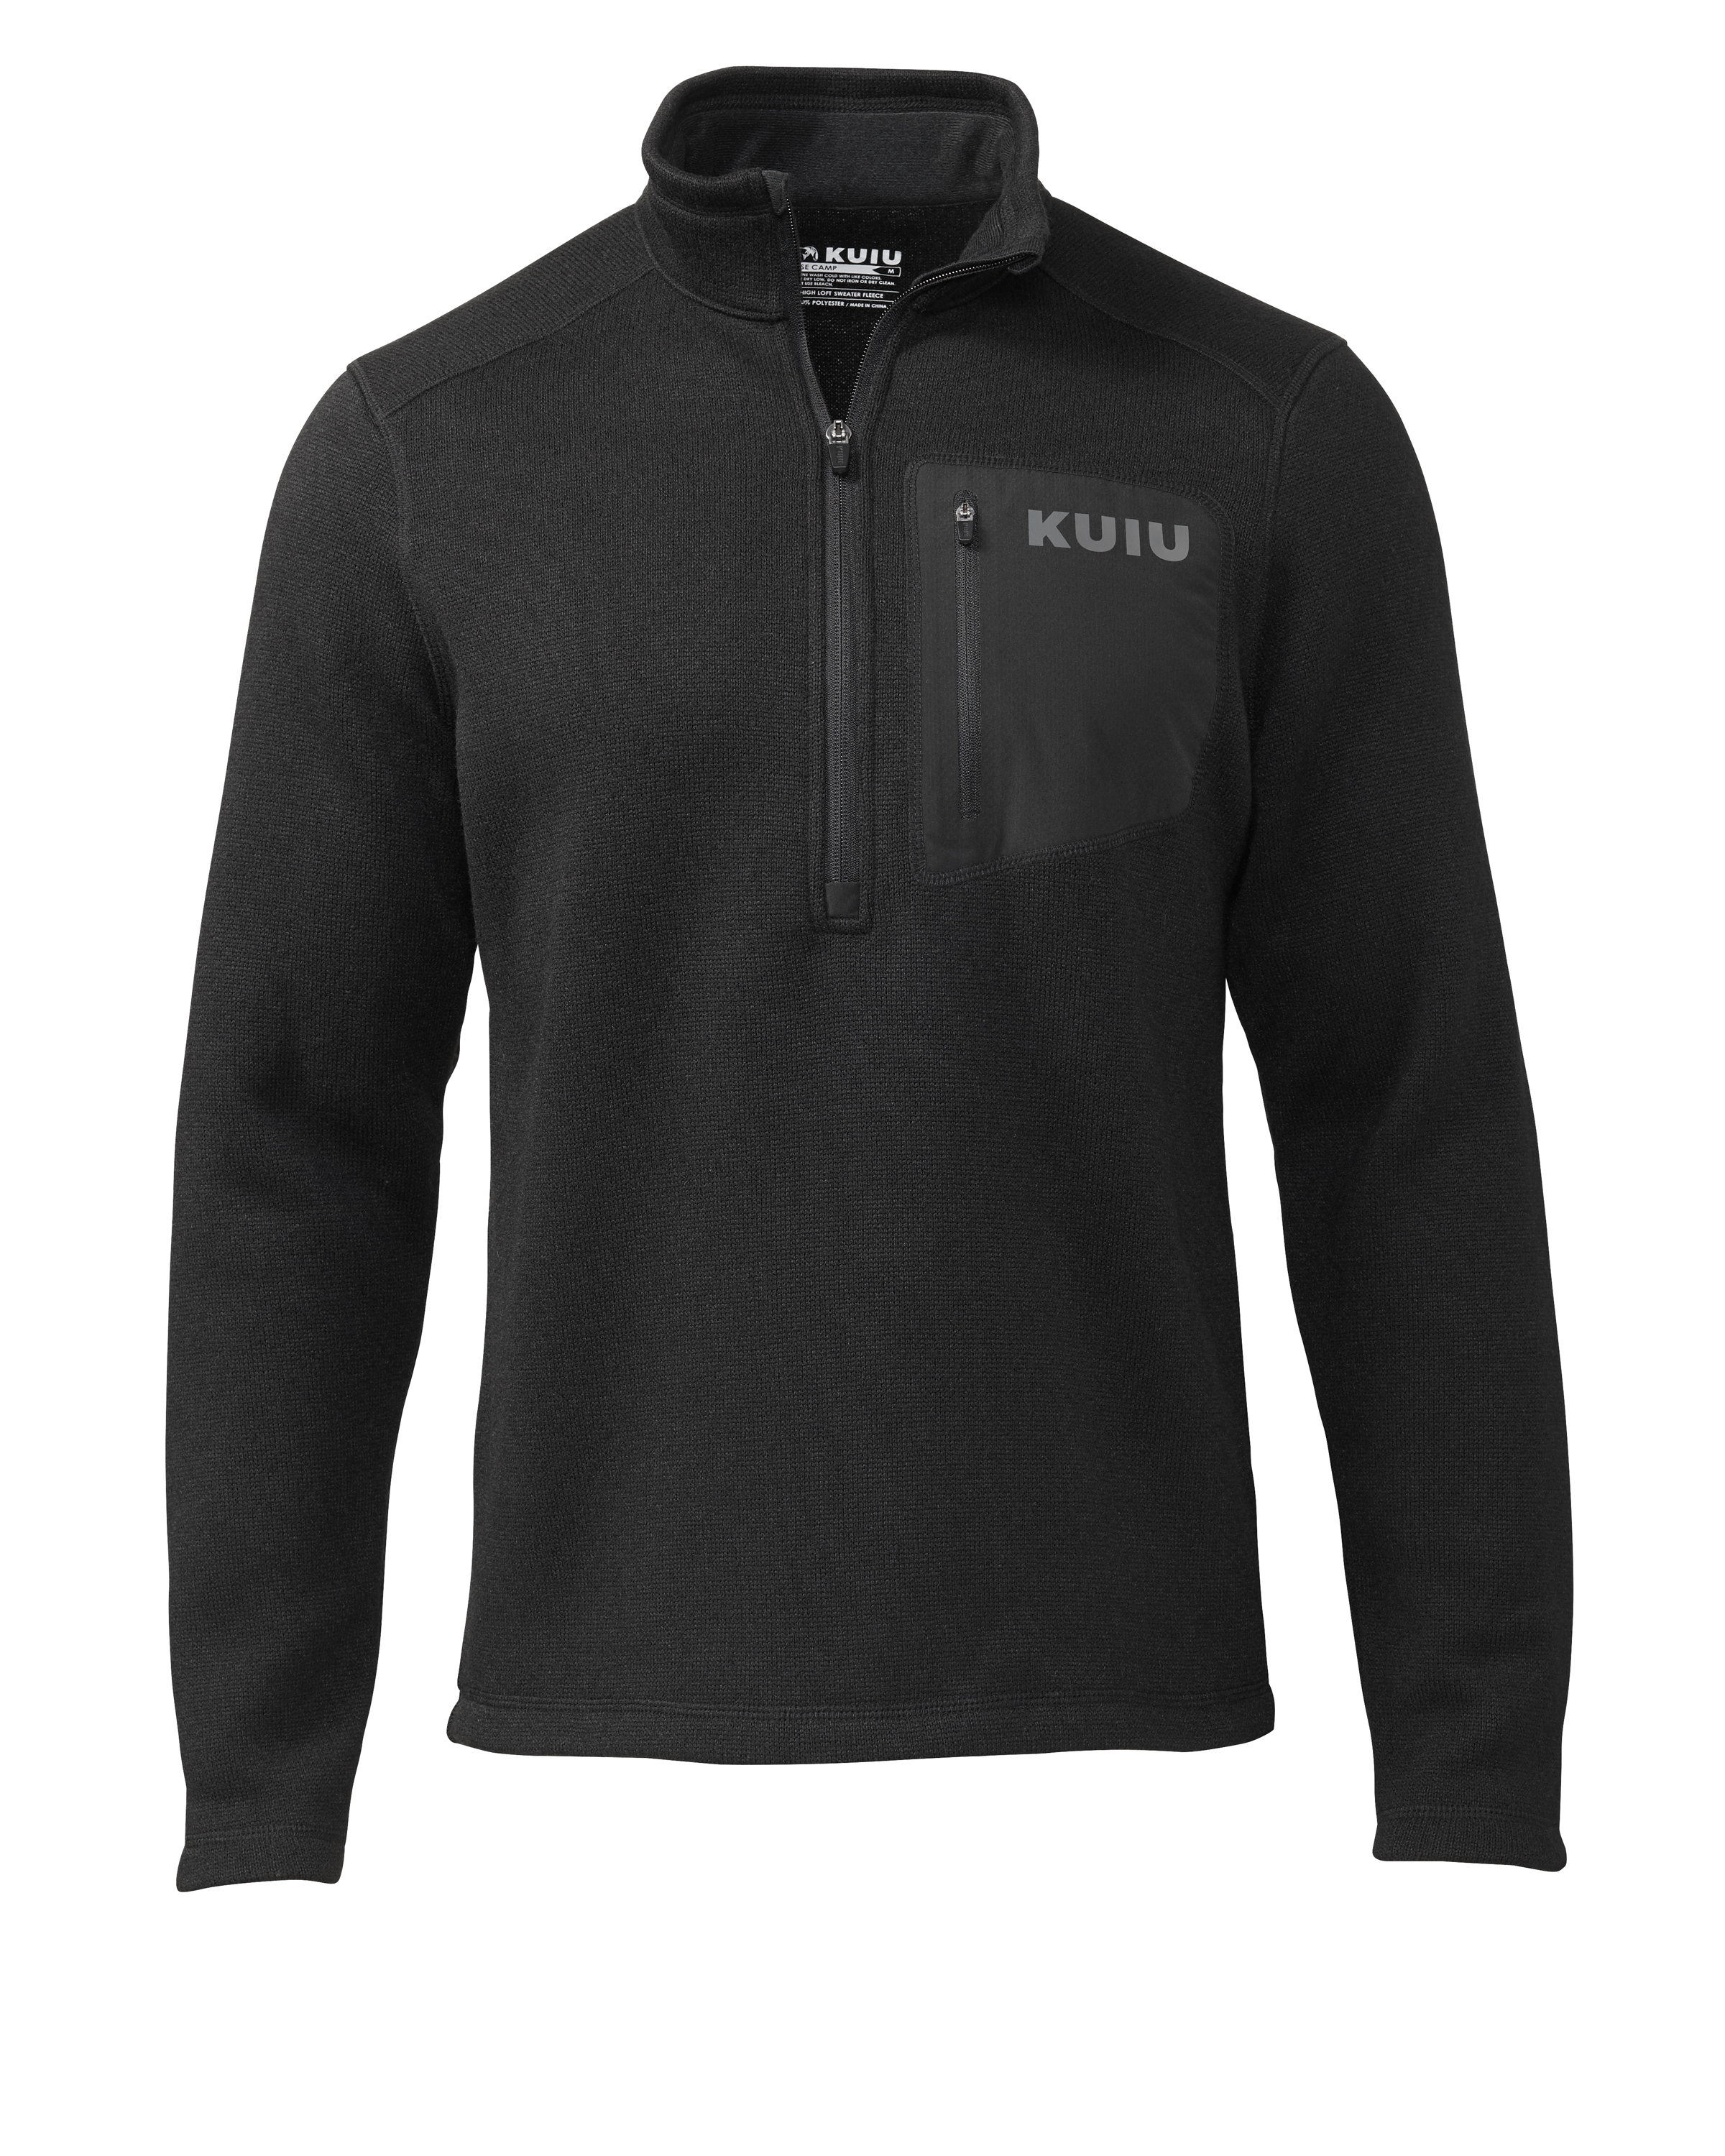 KUIU Base Camp Pullover Sweater in Black | Size 2XL